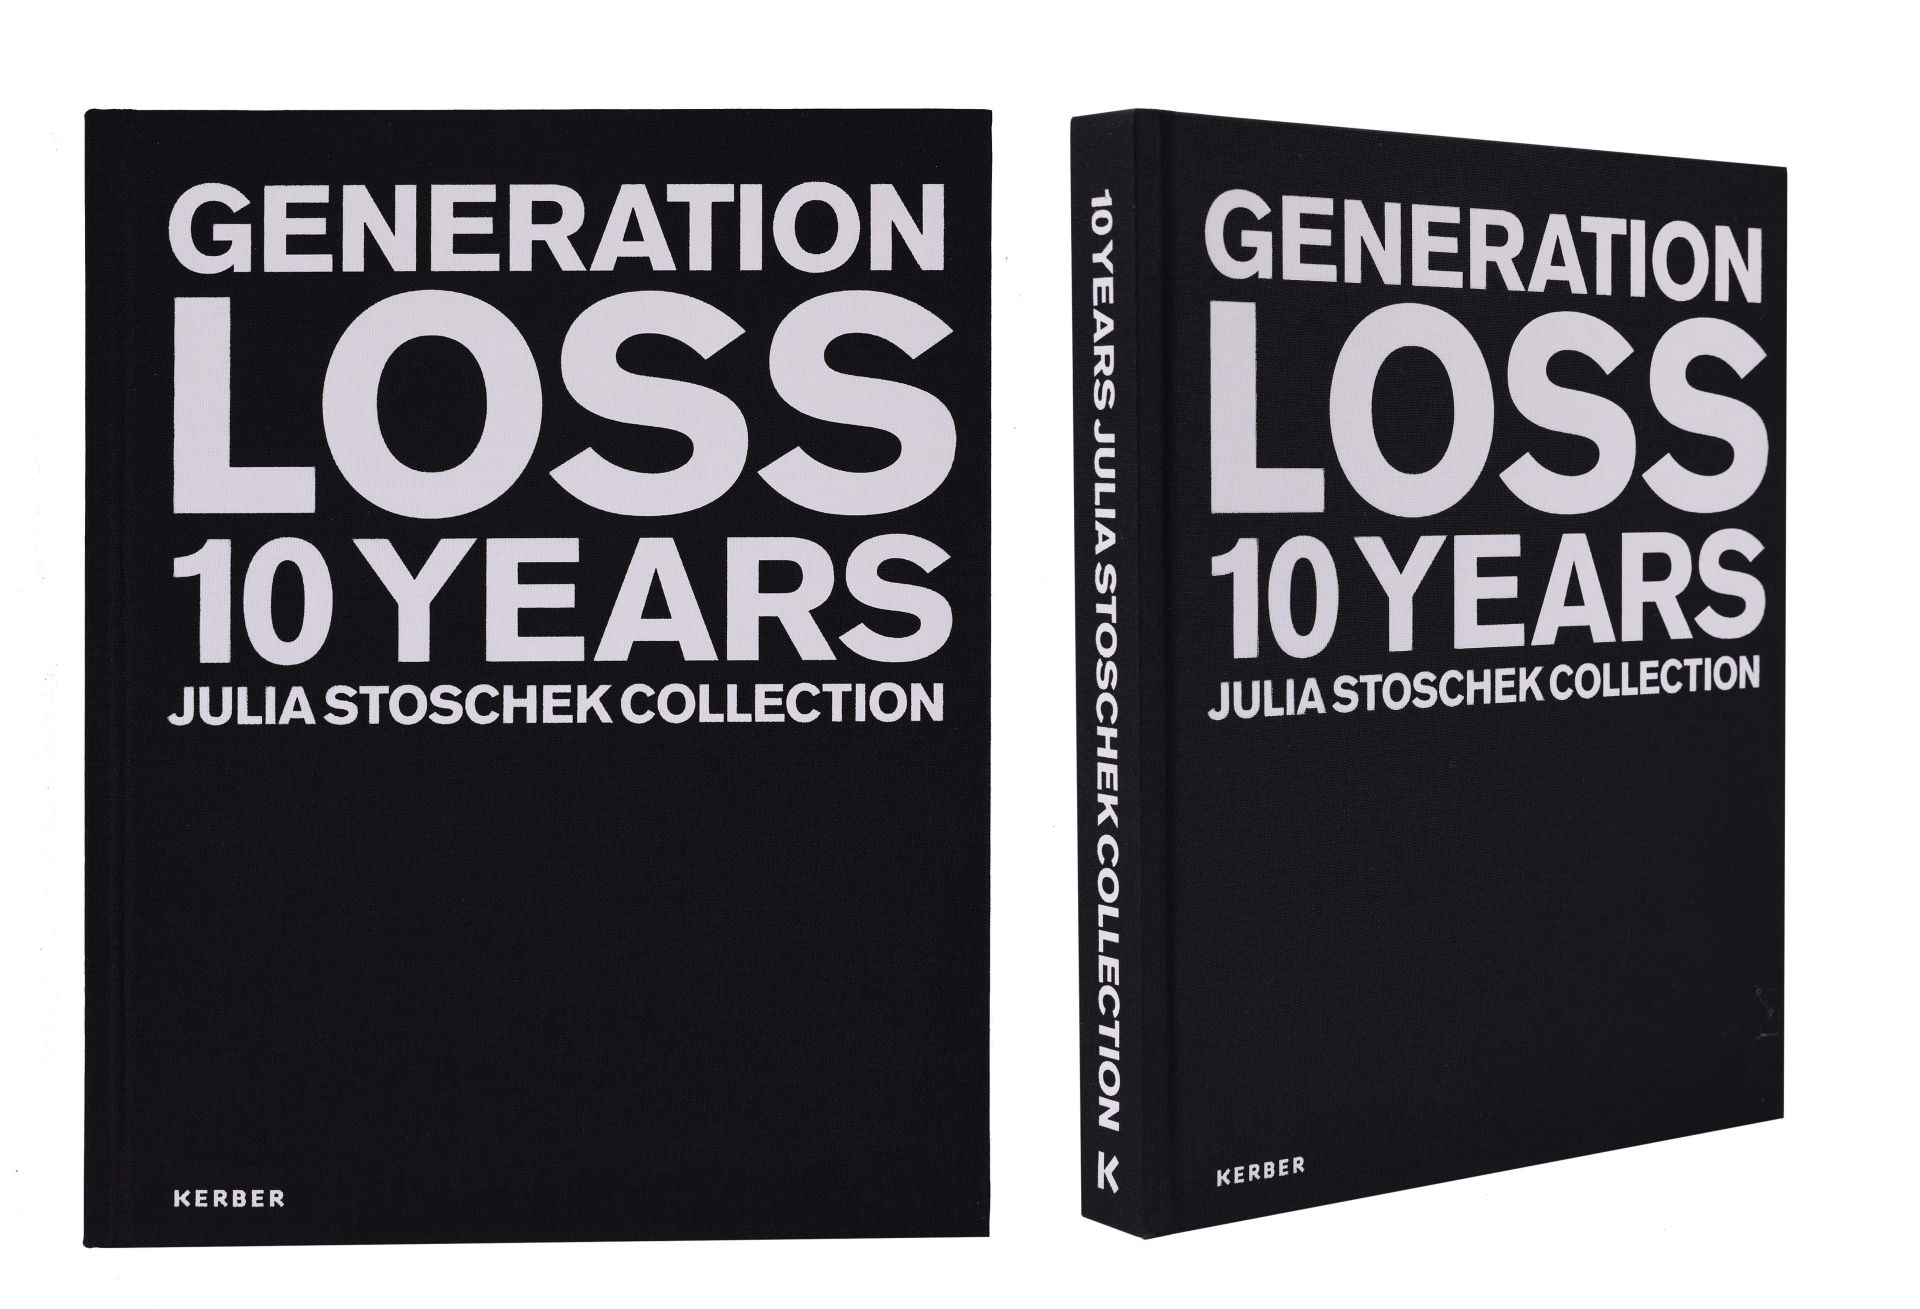 GENERATION LOSS: 10 YEARS OF JULIA STOSCHEK COLLECTION